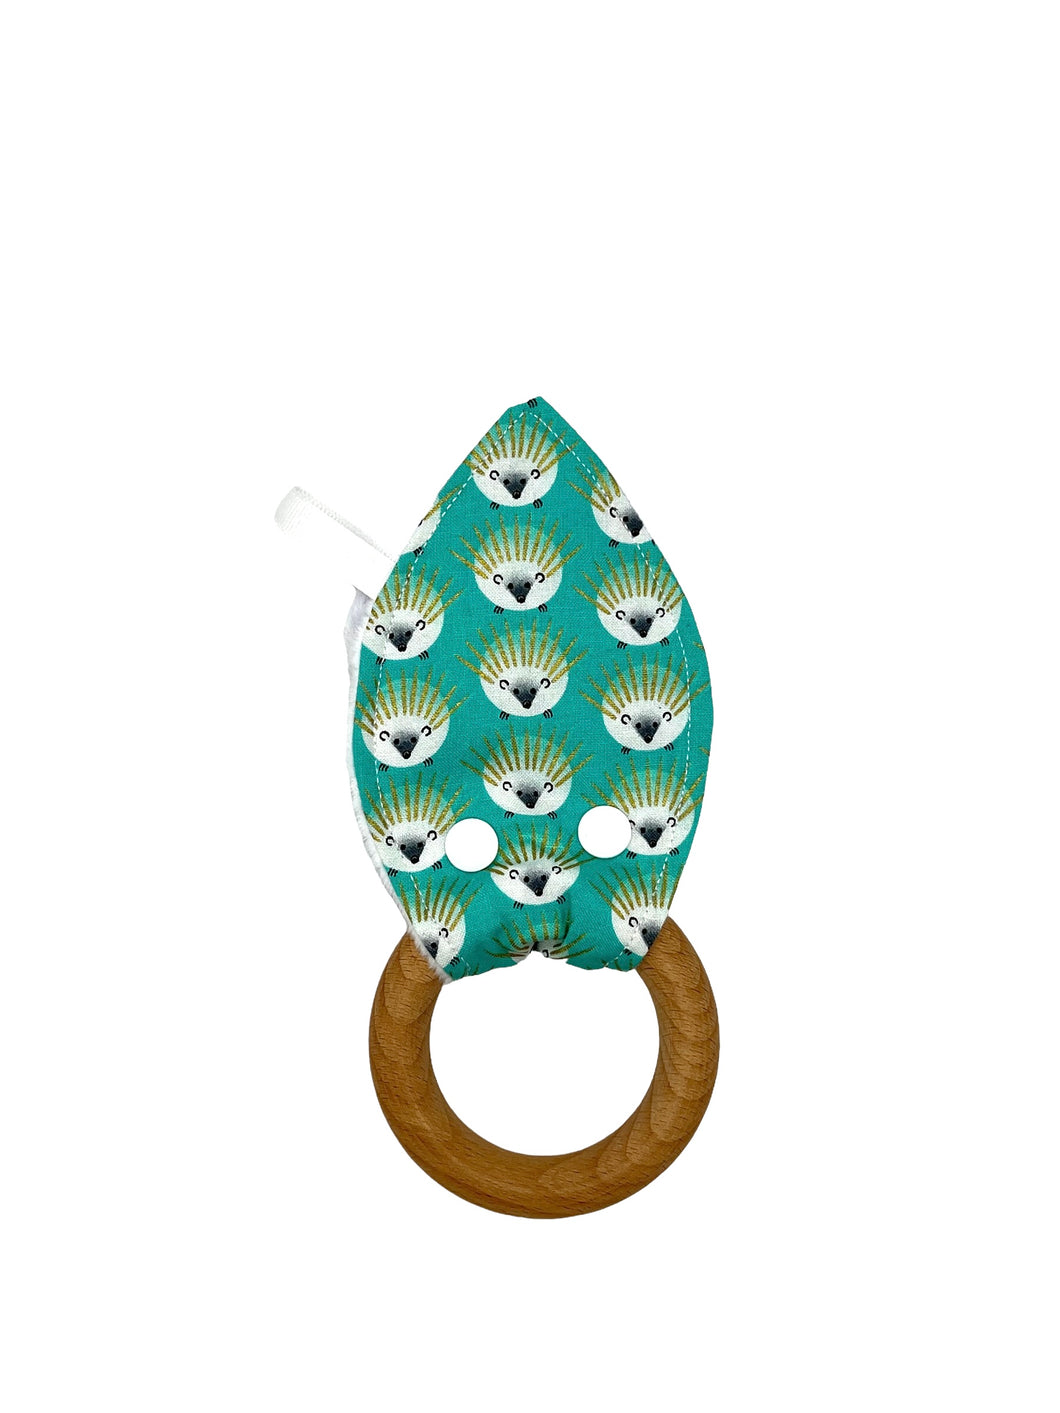 Crinkle Teether in 'Glitter Critters in Turquoise'